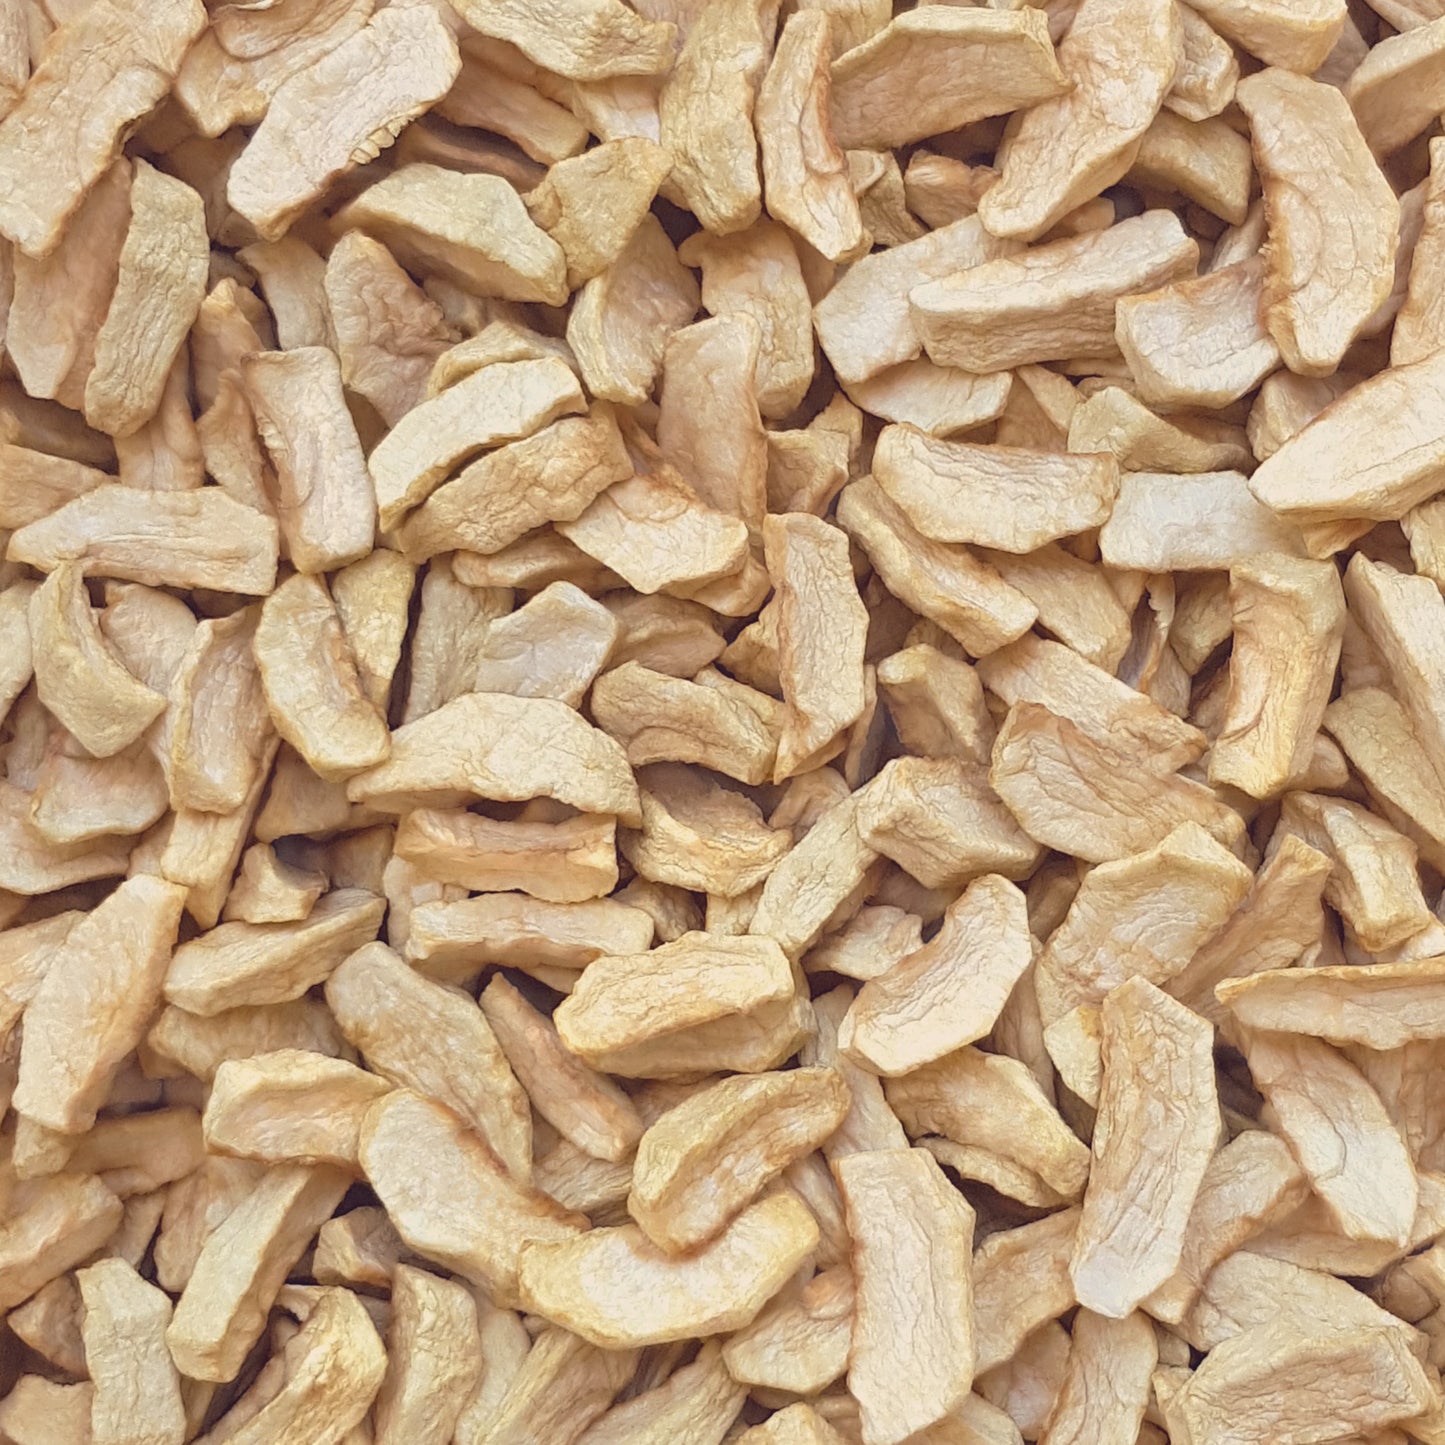 Full frame overhead image of BY NATURE Dried Apple Segments - preservative-free.